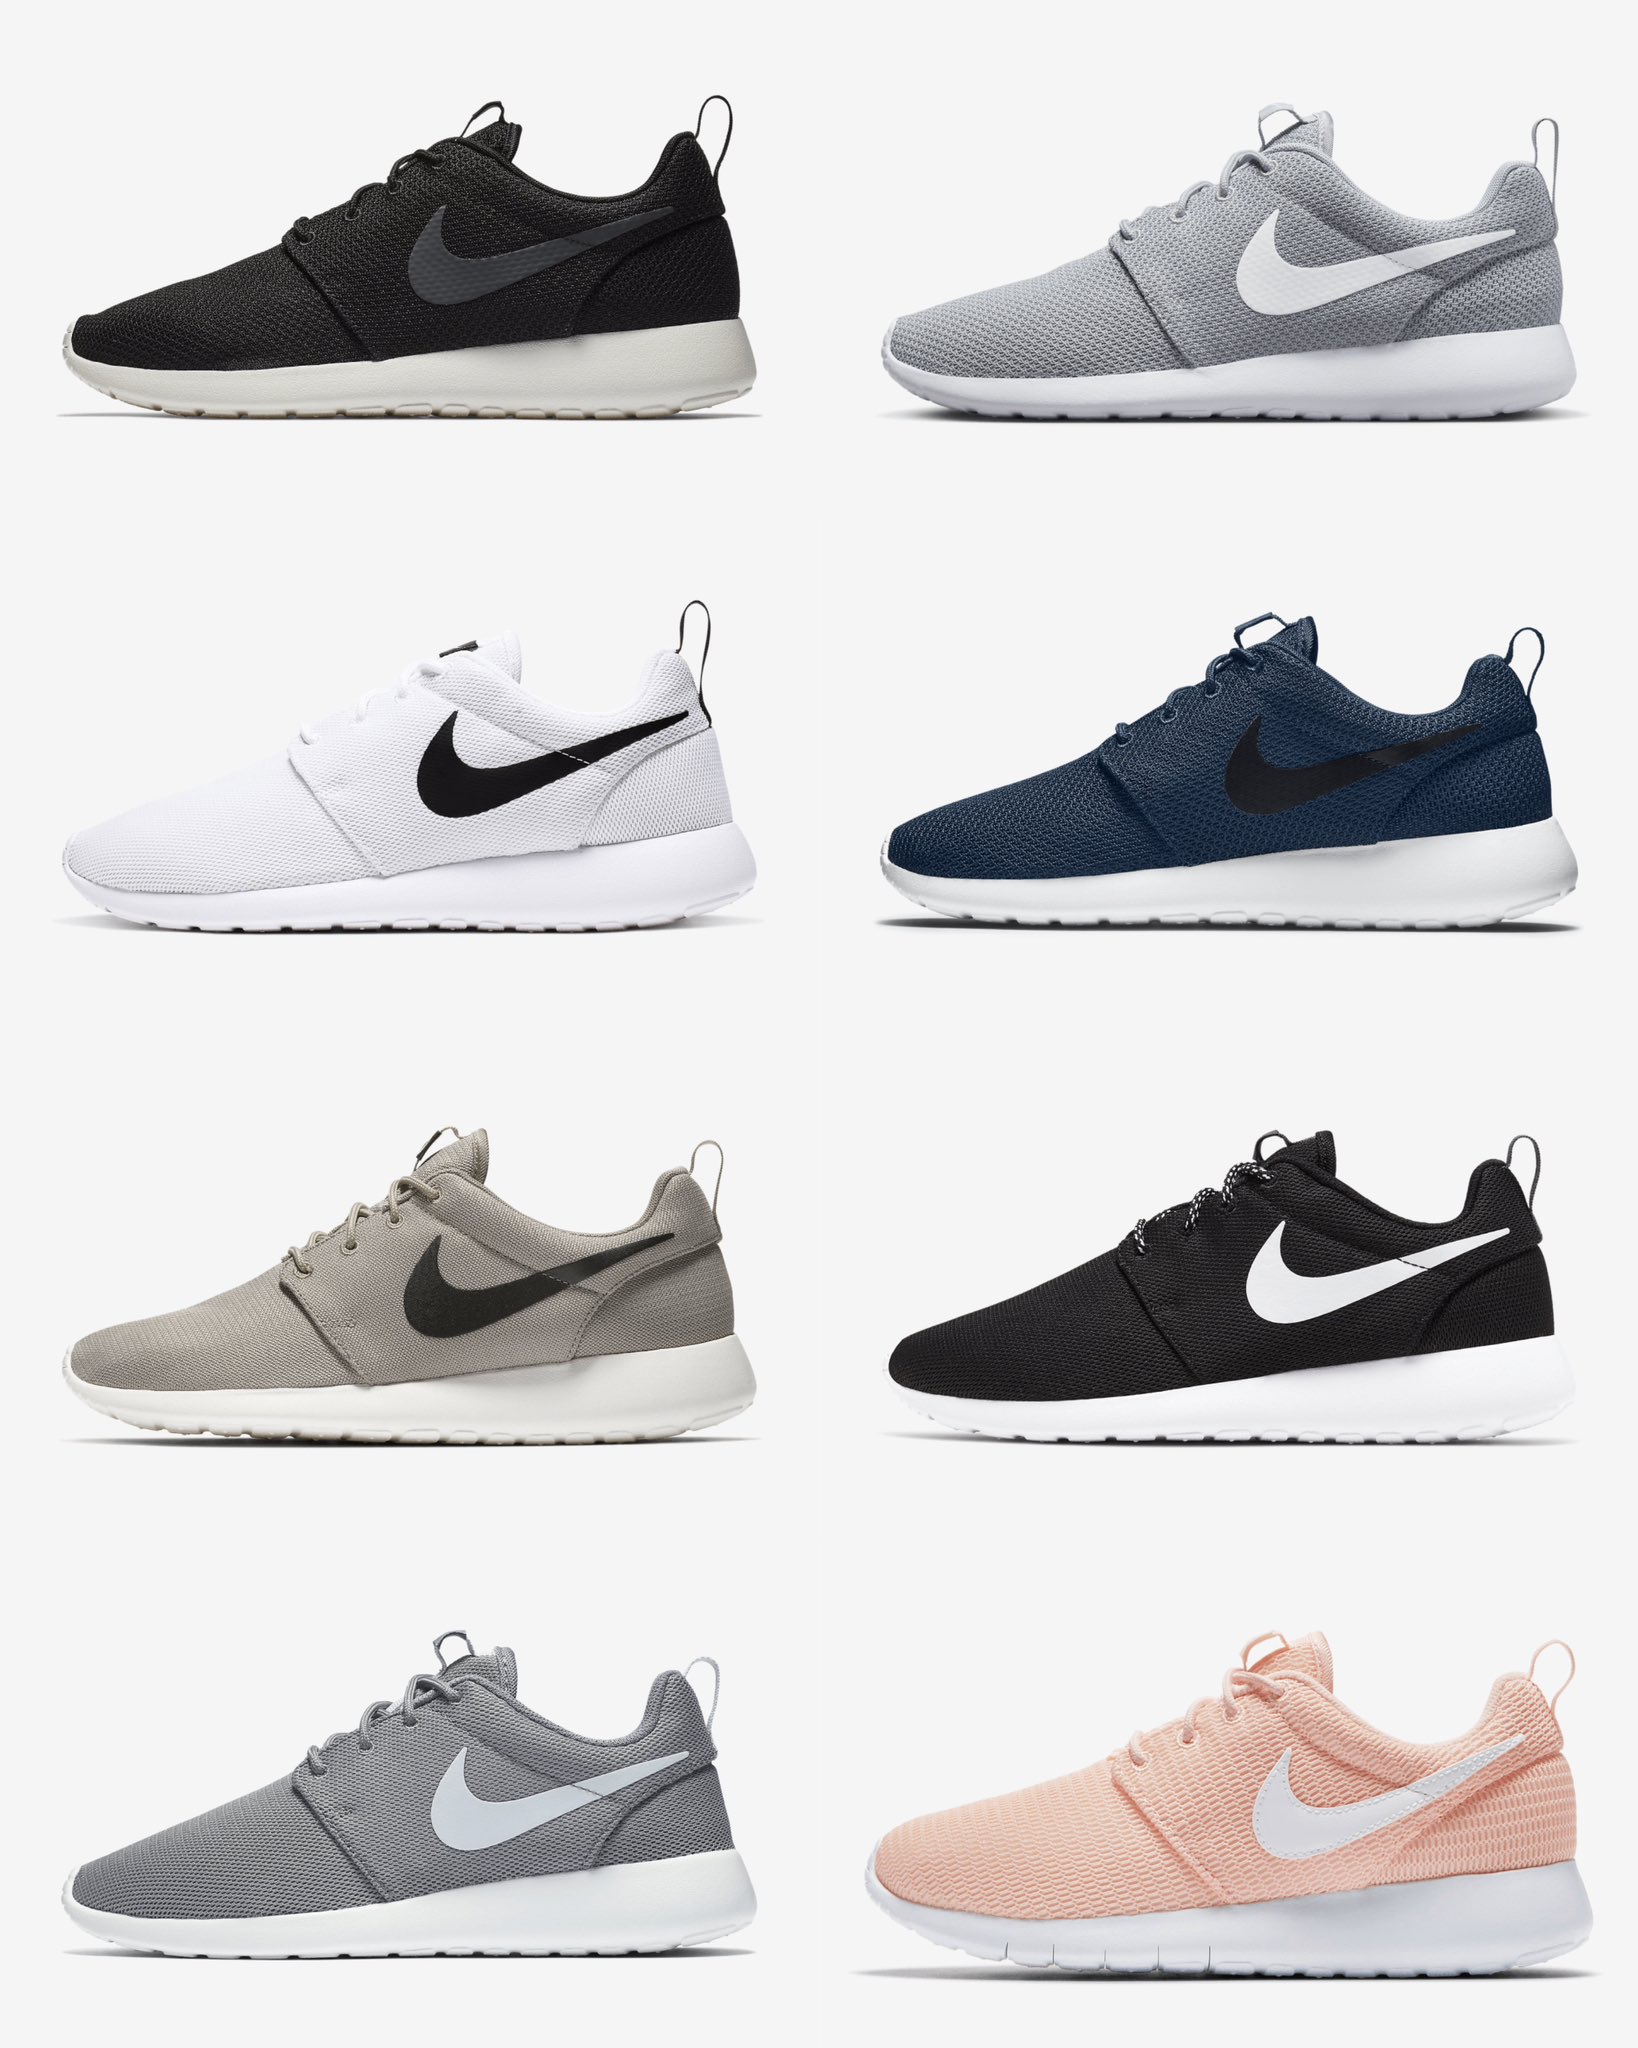 nuez hemisferio callejón Nice Kicks on Twitter: "Nike is bringing back the Nike Roshe Run this fall  👀 Thoughts on these returning? @SoleRetriever https://t.co/Dl8zzLTNWL" /  Twitter